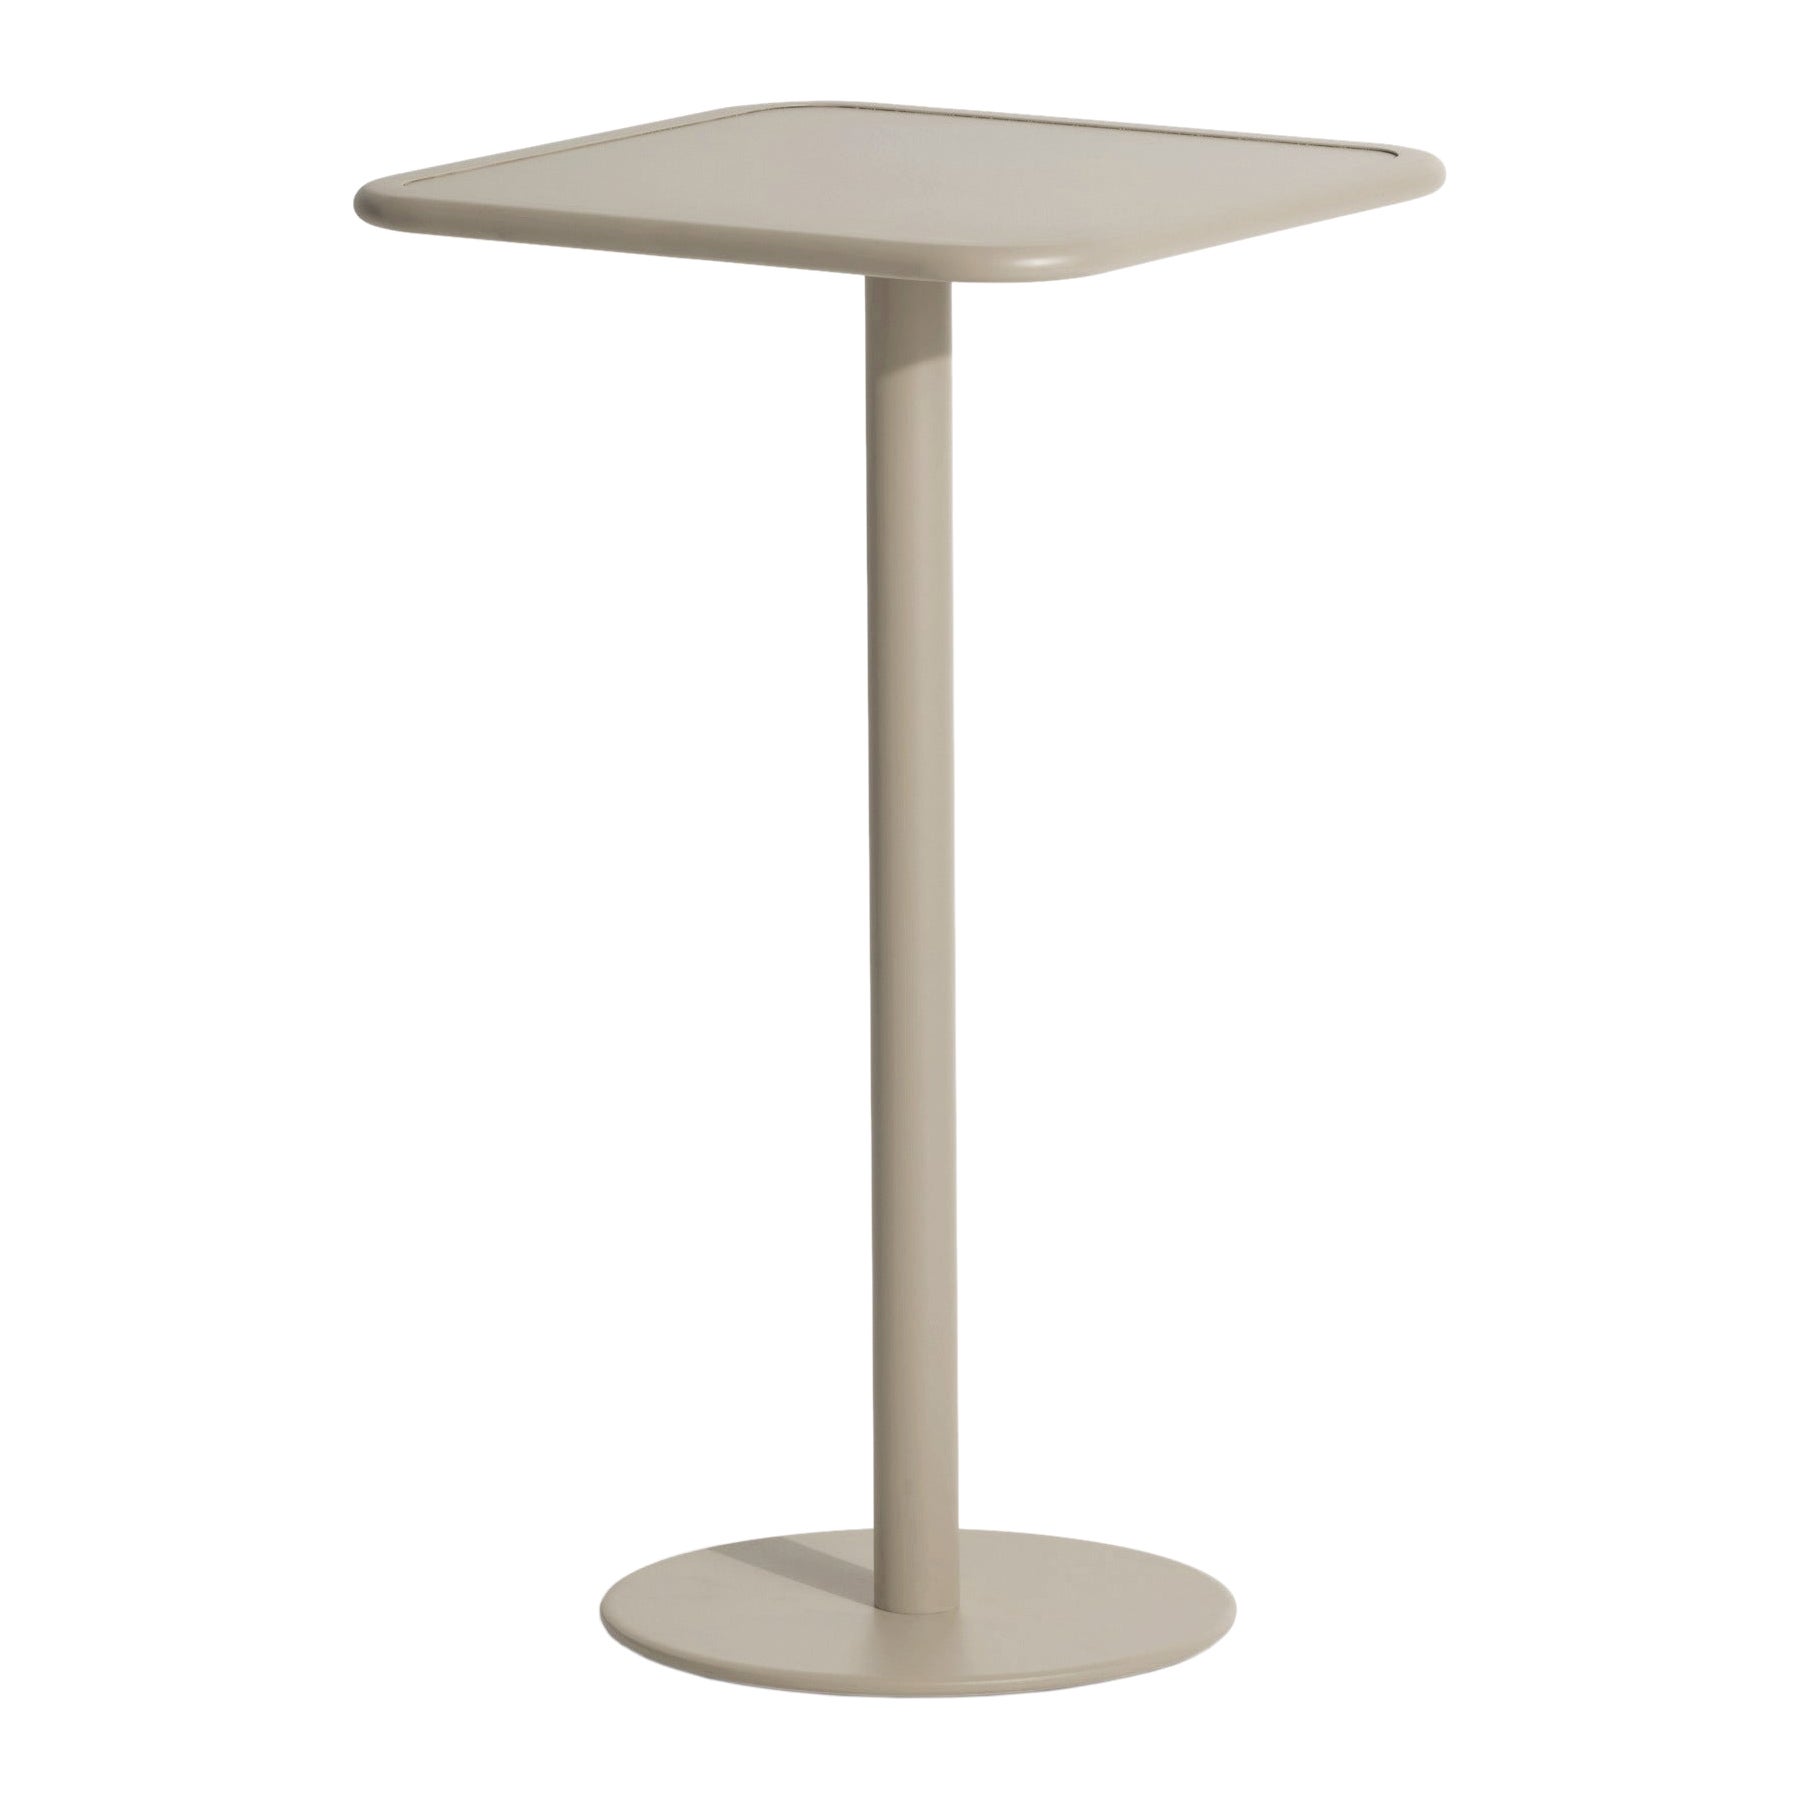 Petite Friture Week-End Square High Table in Dune Aluminium, 2017 For Sale